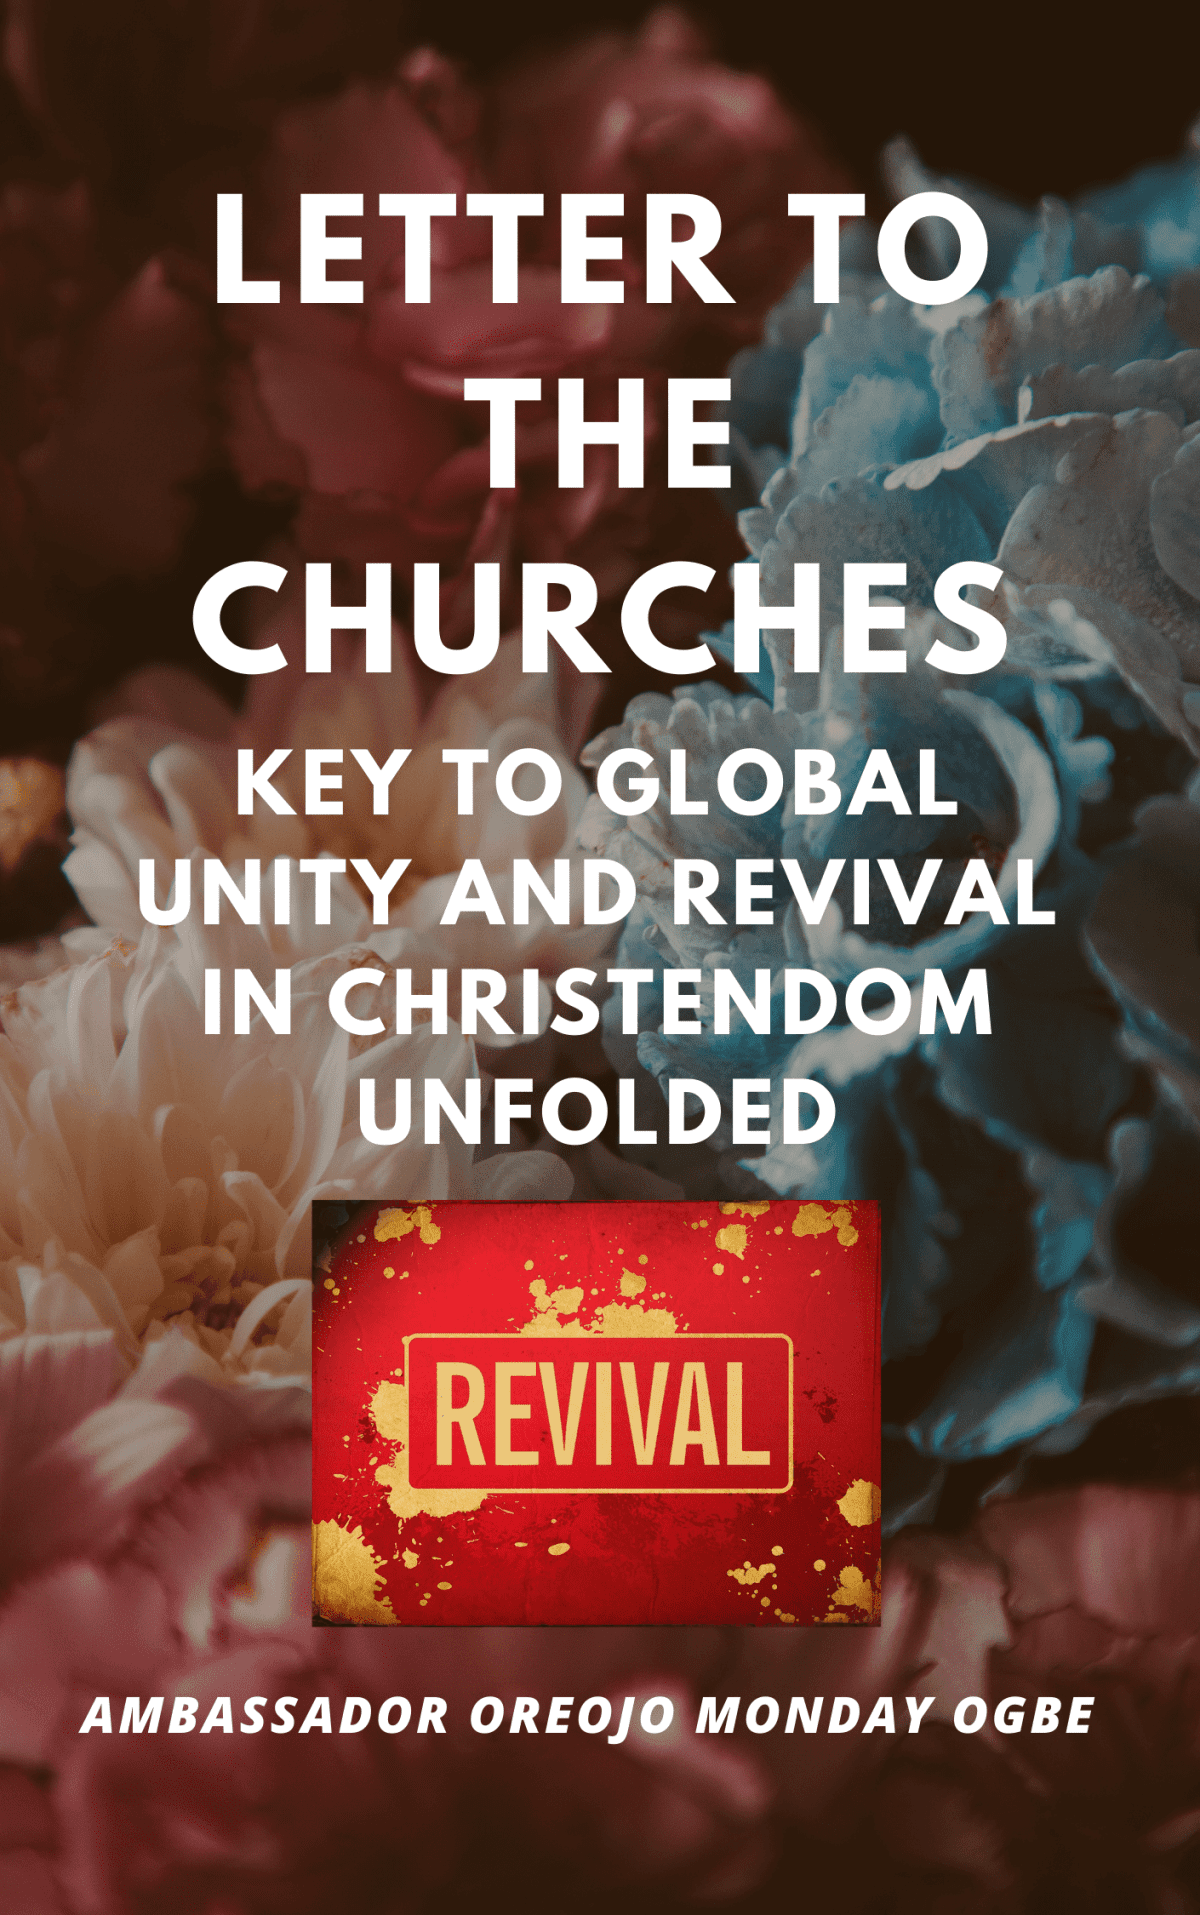 Letter to the Churches - Ebook Edition - Key to Global Unity and Revival in Christendom Unfolded